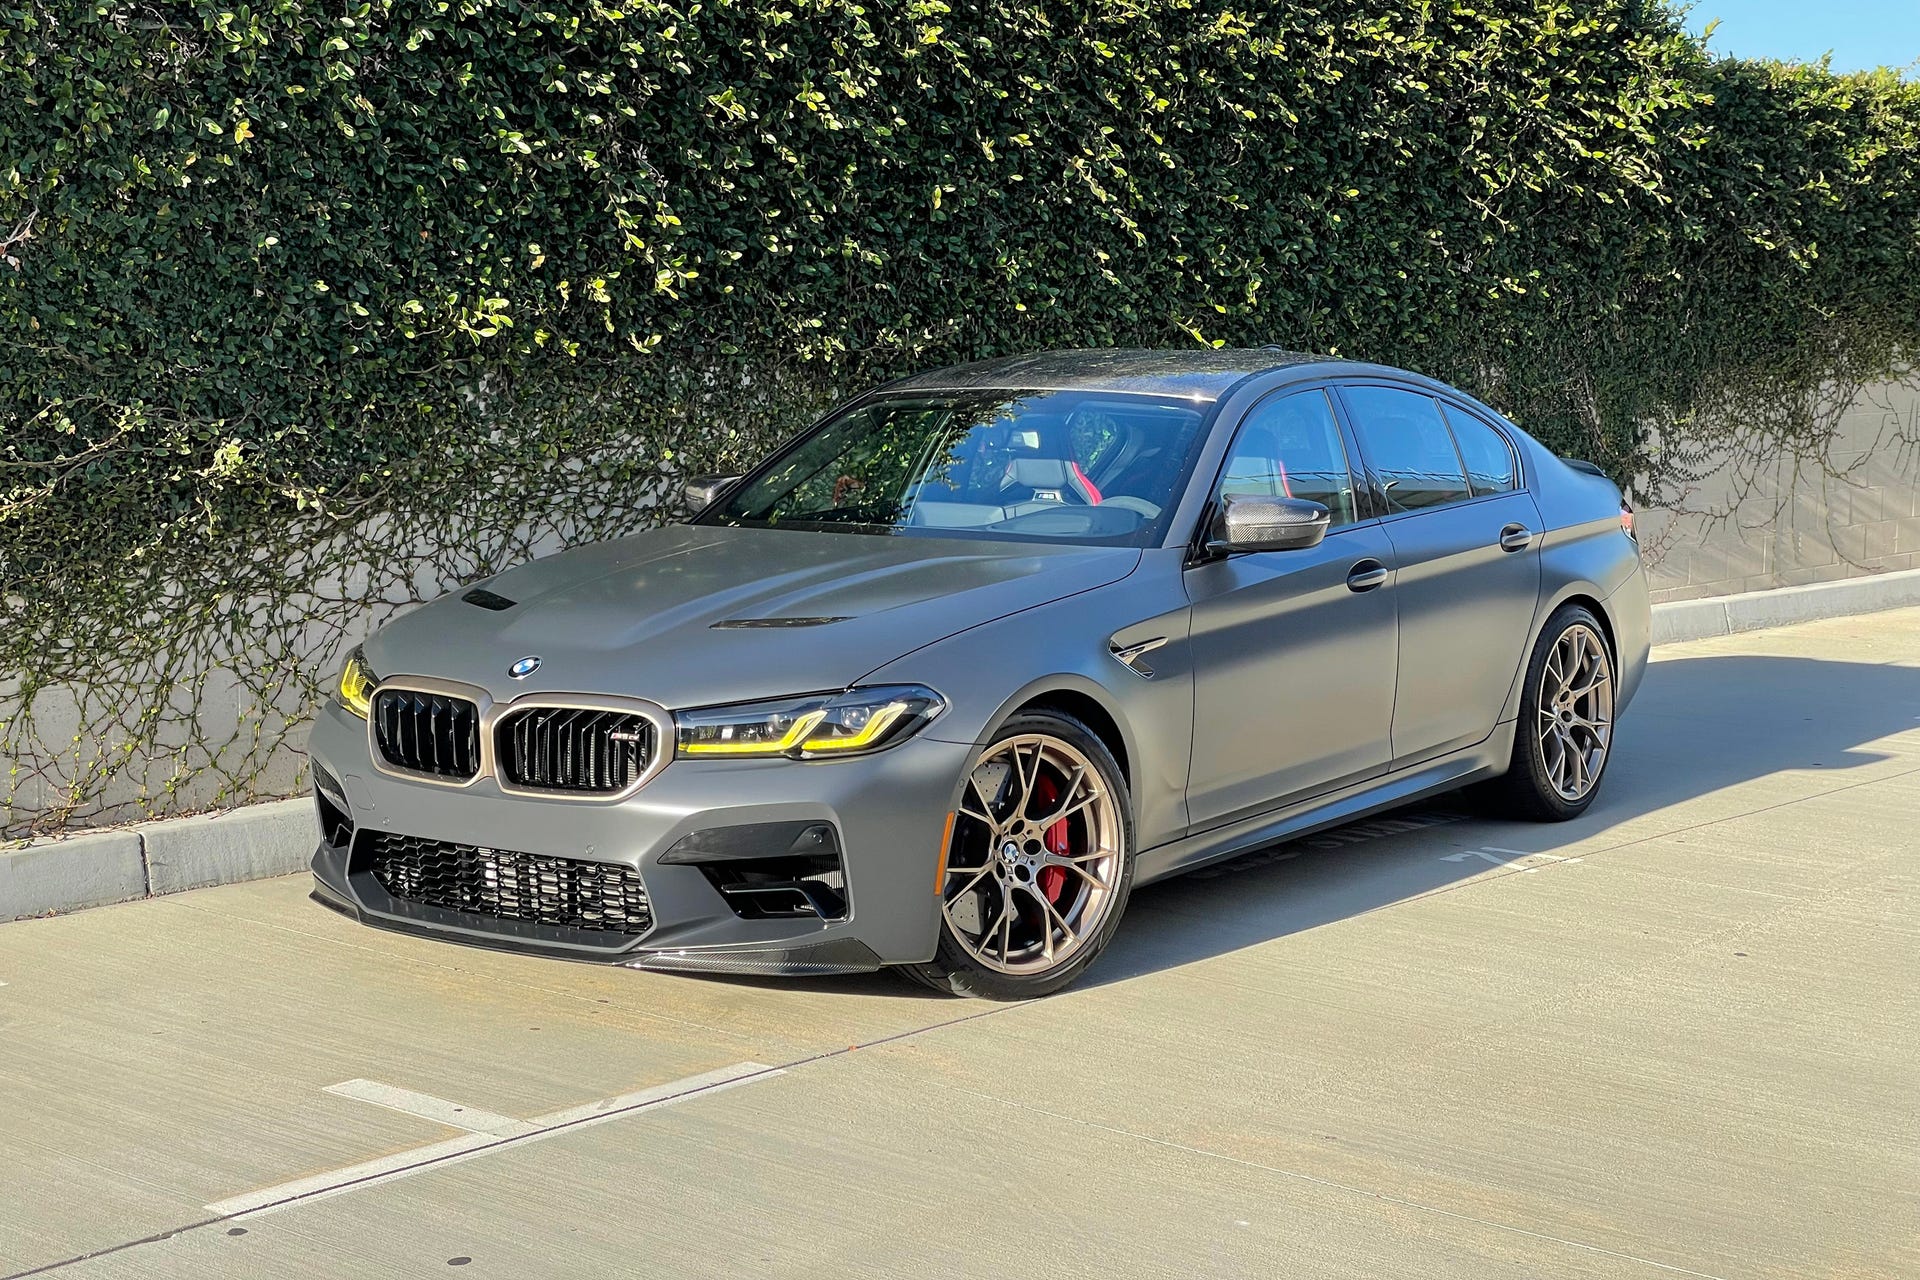 2022 BMW M5 CS review: Go for the gold - CNET